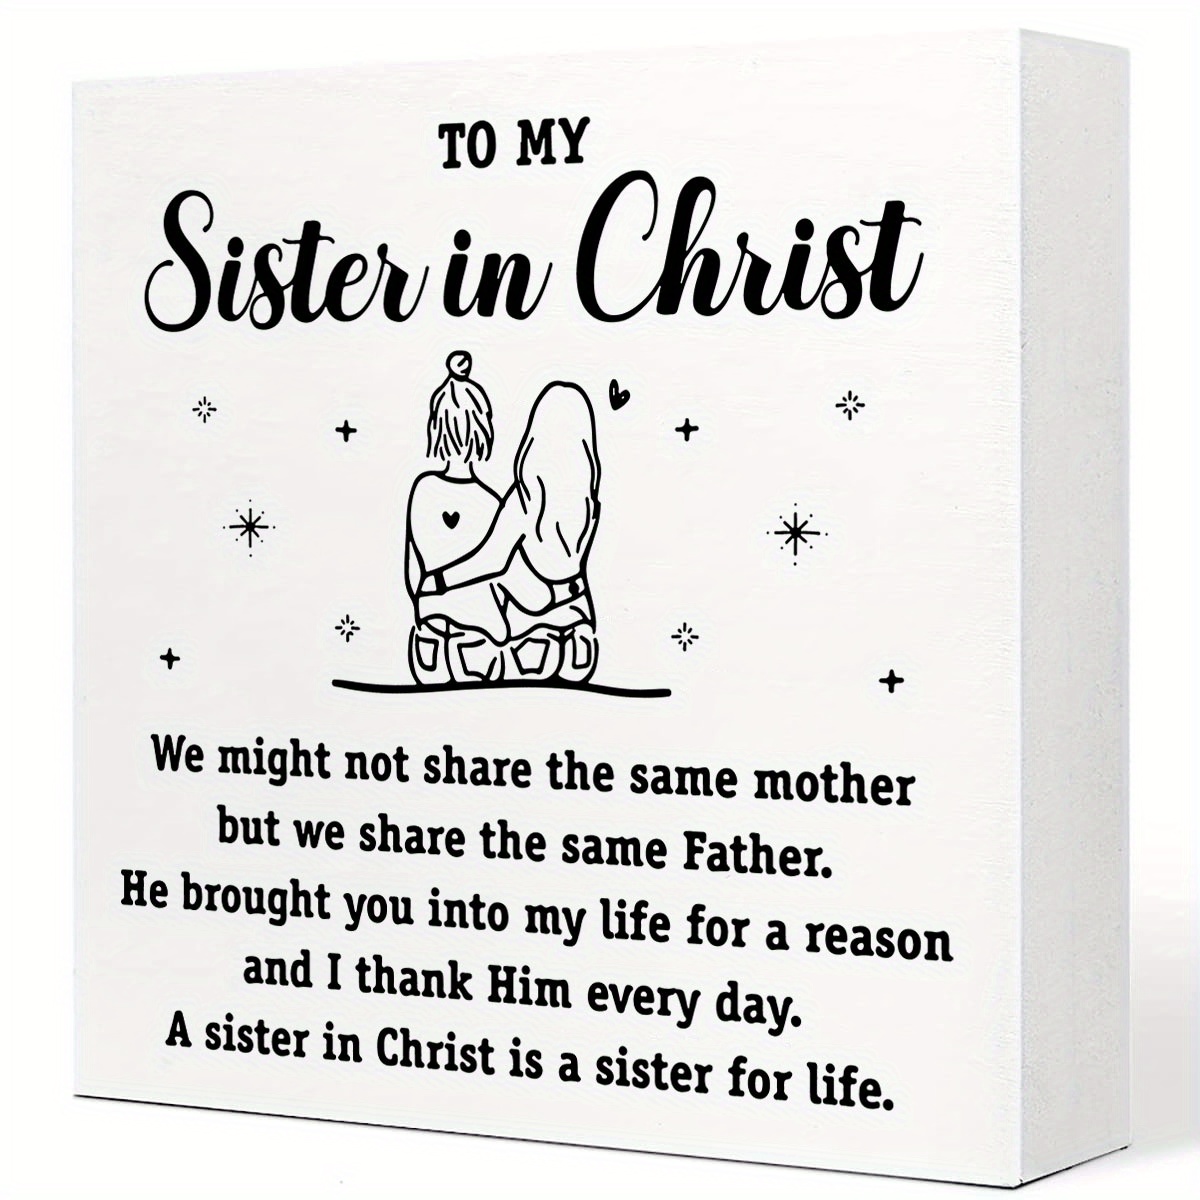 

1pc, To My Sisters In Christ Wood Box Sign Rustic This Calls For A Spreadsheet Work Wooden Box Sign Decorative Signs Block Plaque For Home Office Desk Table Shelf Decor